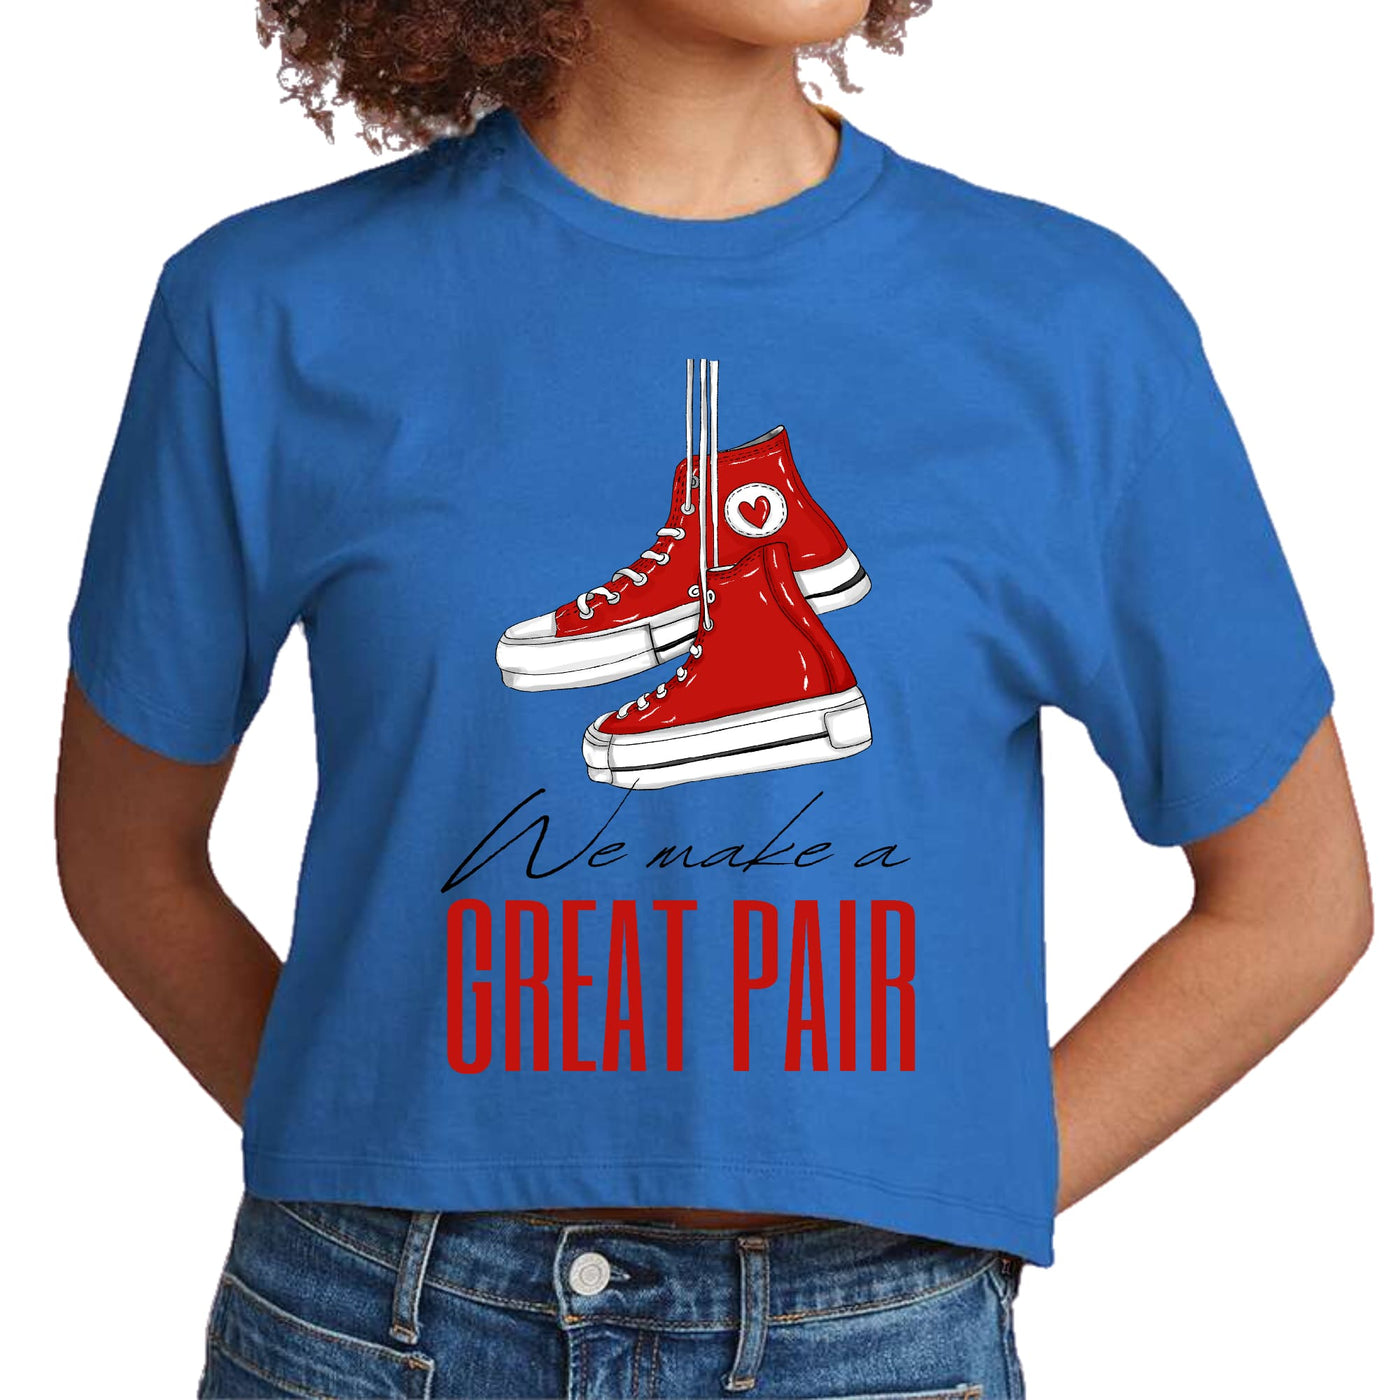 Womens Cropped Graphic T-shirt Say It Soul We Make a Great Pair Red - Womens